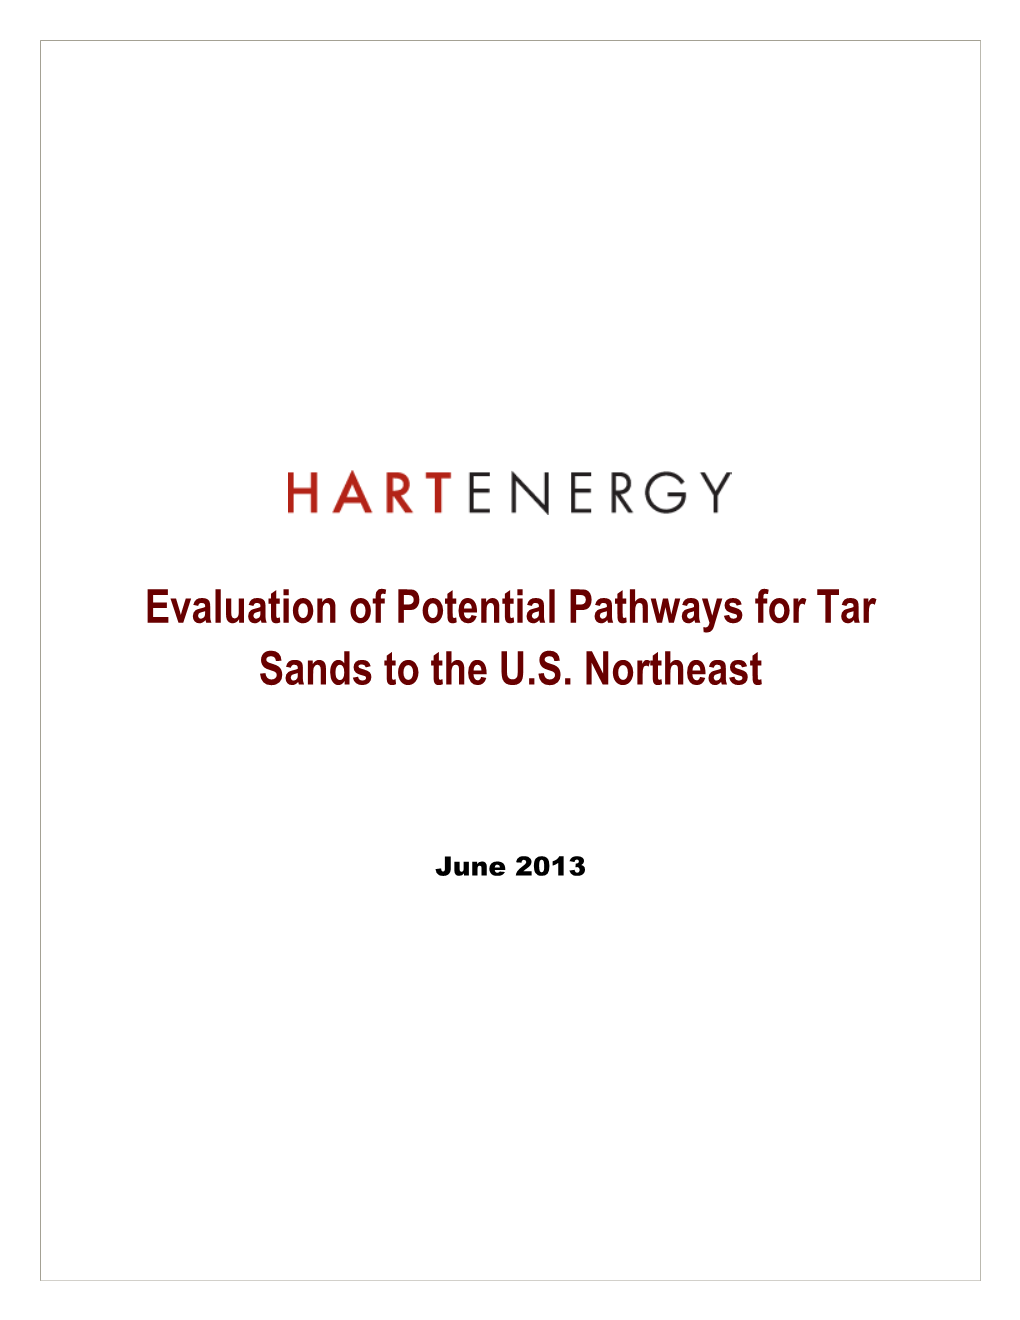 Evaluation of Potential Pathways for Tar Sands to the U.S. Northeast